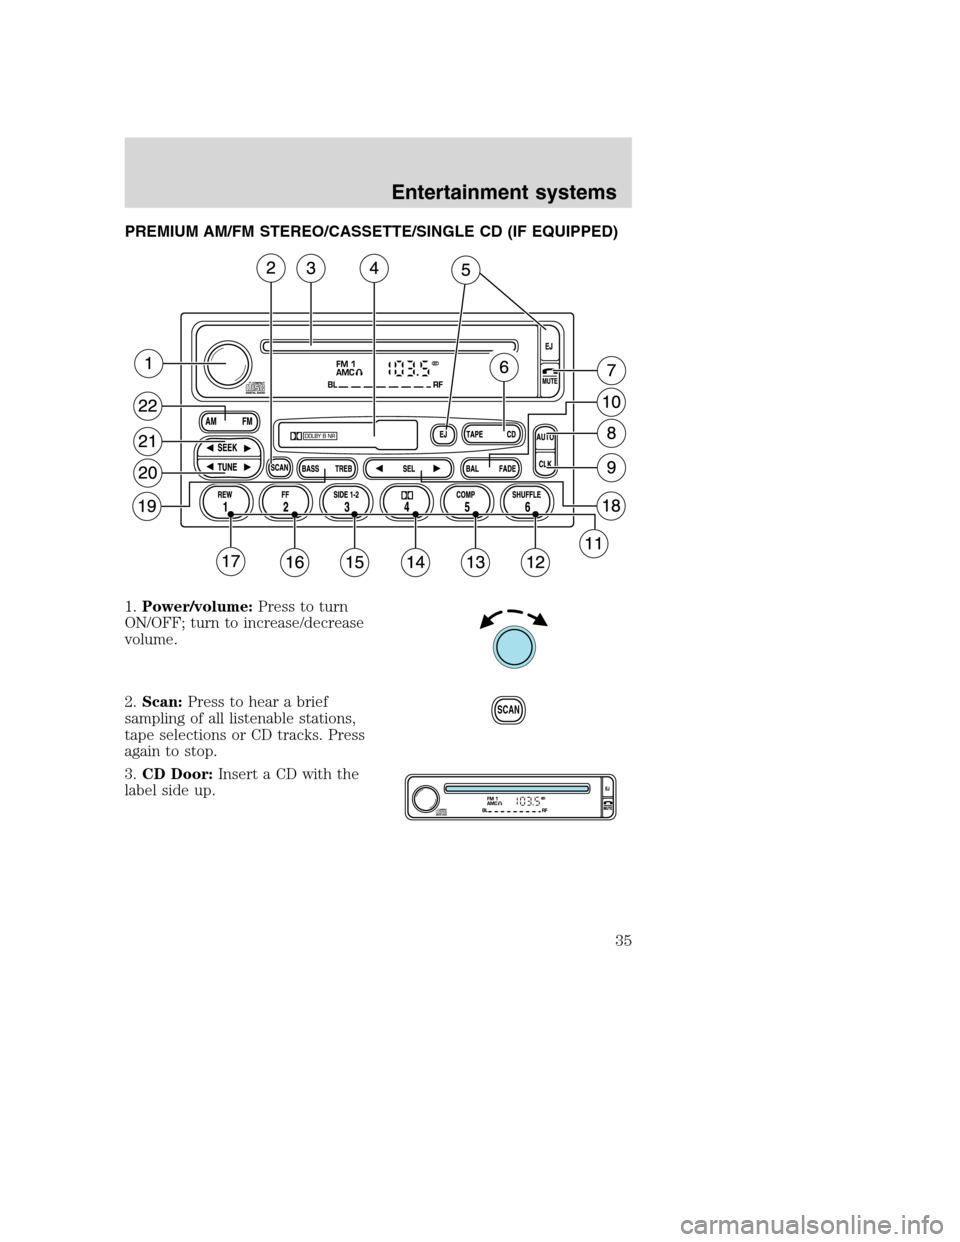 FORD F750 2005 11.G Owners Guide PREMIUM AM/FM STEREO/CASSETTE/SINGLE CD (IF EQUIPPED)
1.Power/volume:Press to turn
ON/OFF; turn to increase/decrease
volume.
2.Scan:Press to hear a brief
sampling of all listenable stations,
tape sele